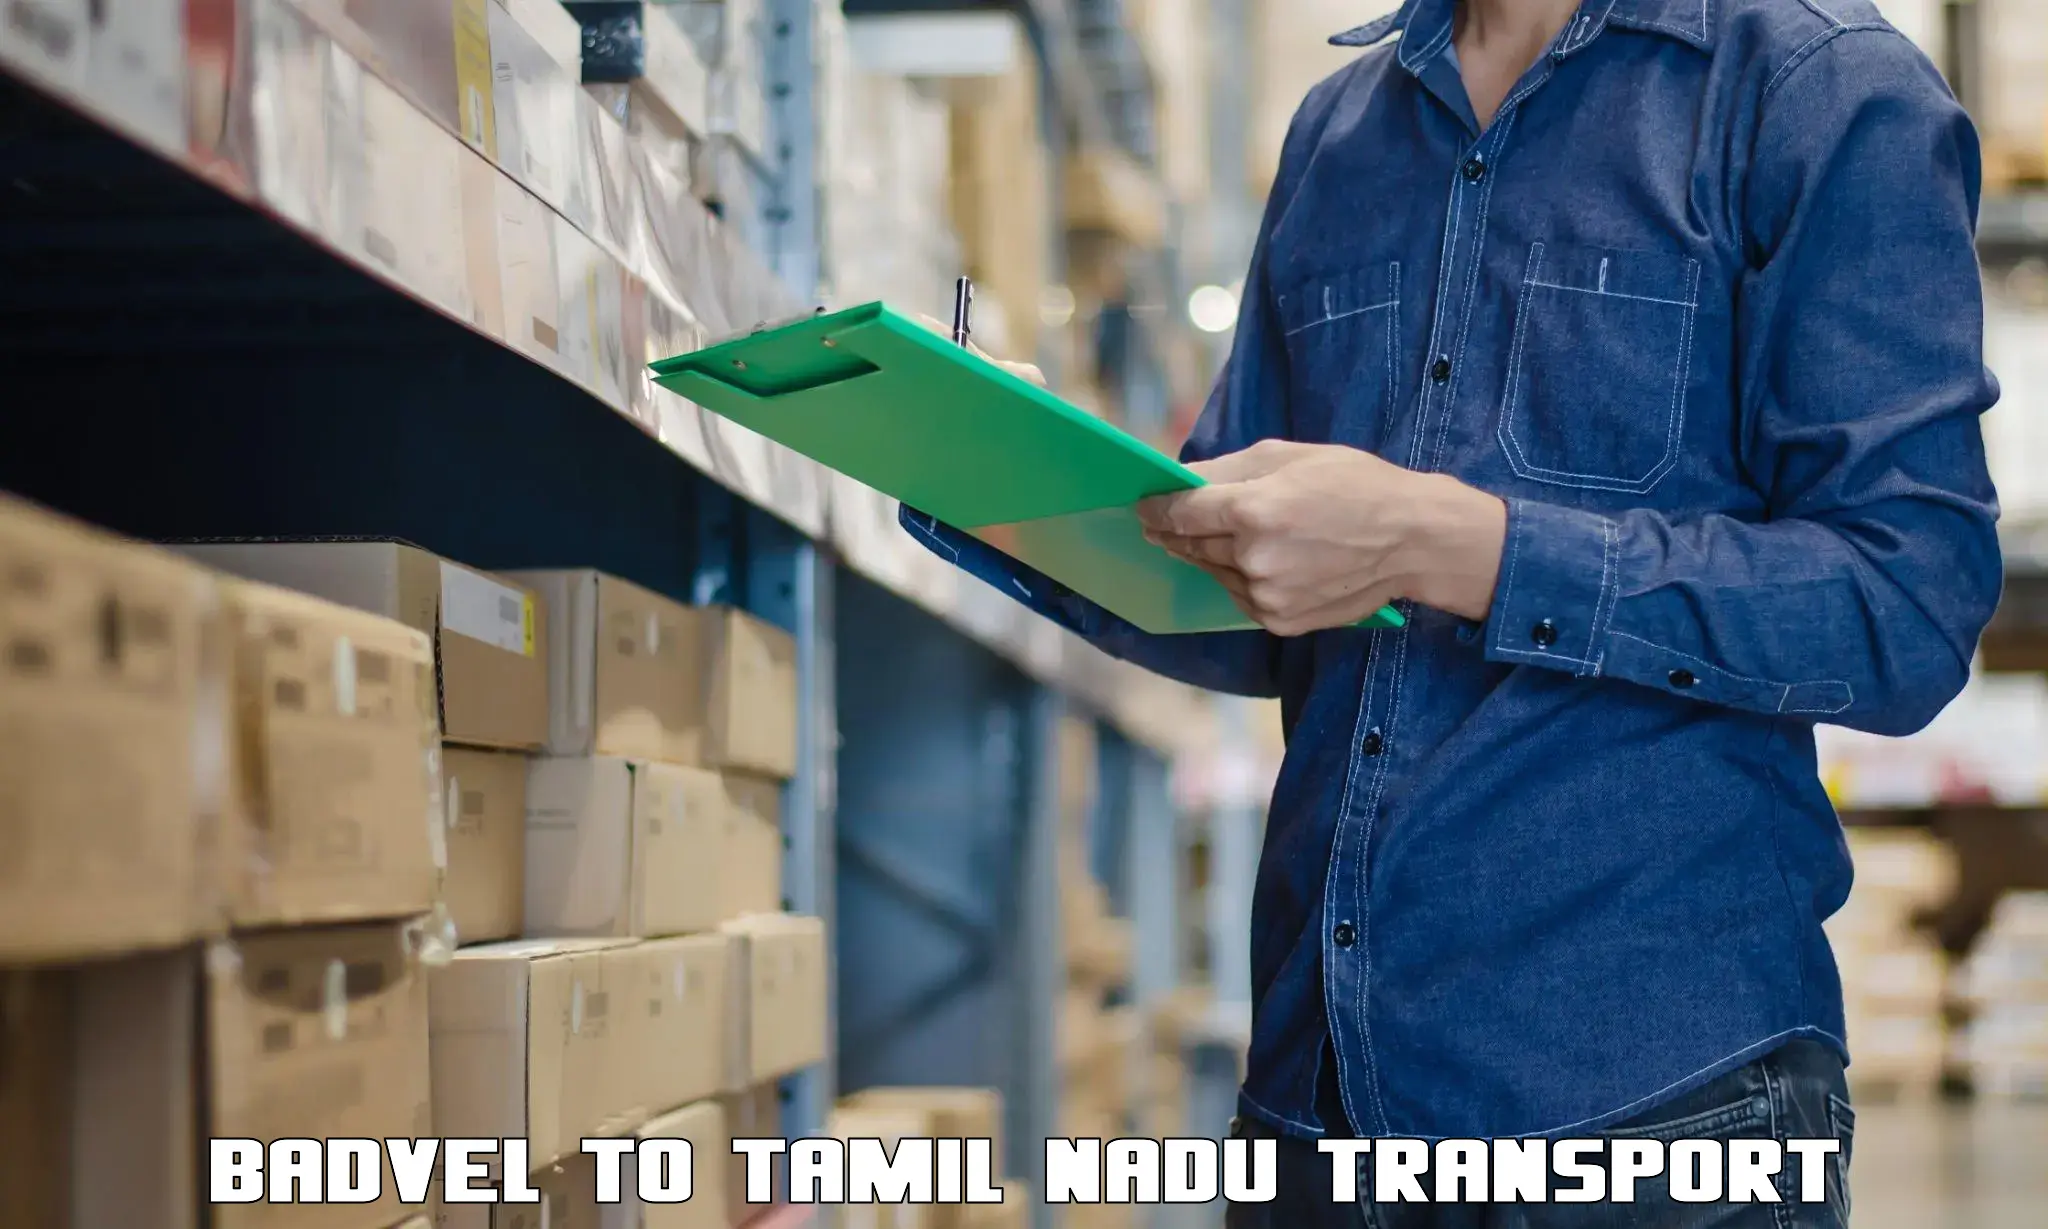 Goods delivery service Badvel to Trichy